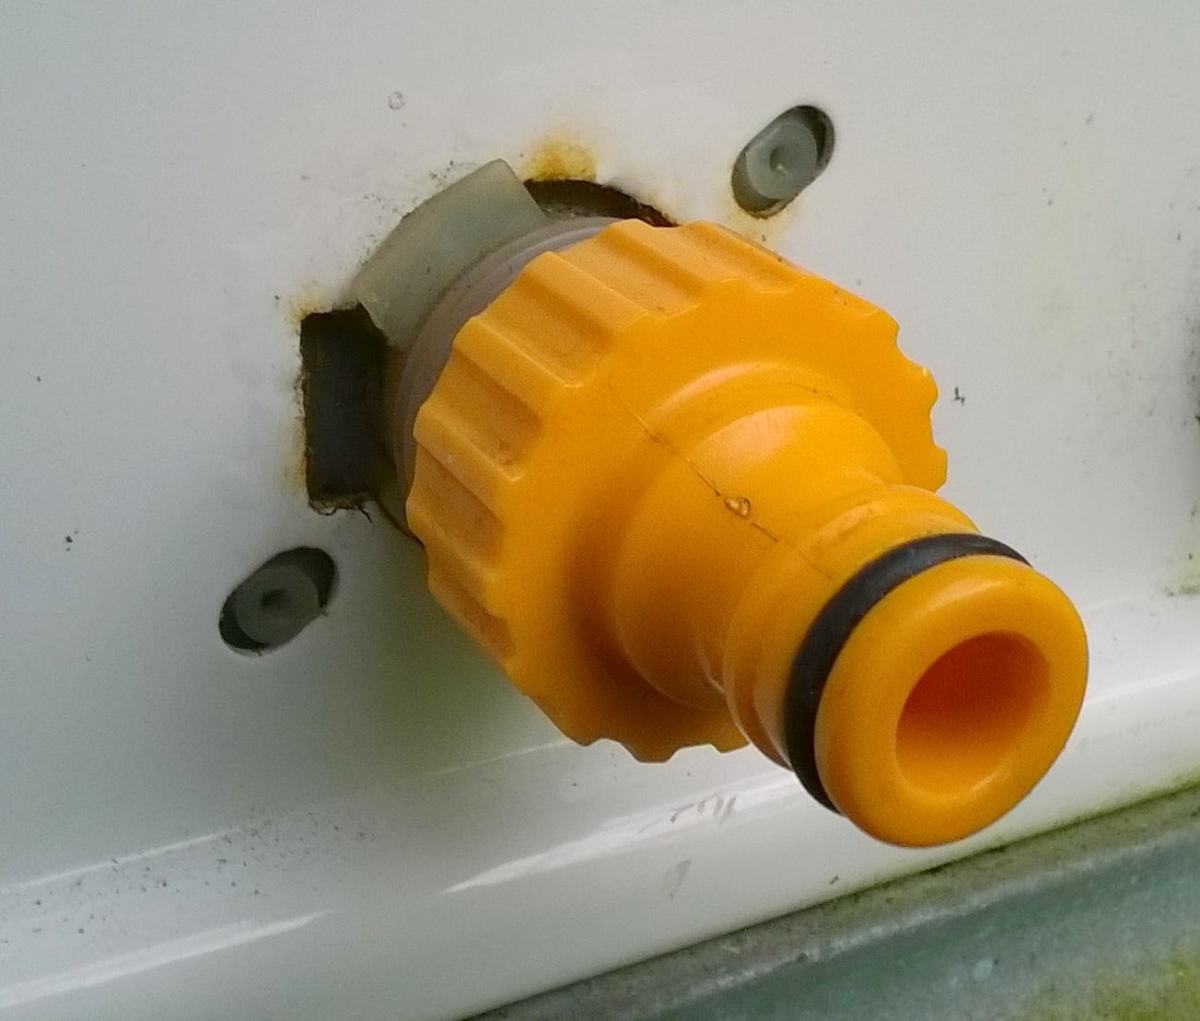 A garden tap connector allows a hose to be used to feed the washing machine. Once this is screwed on, just push fit the hose